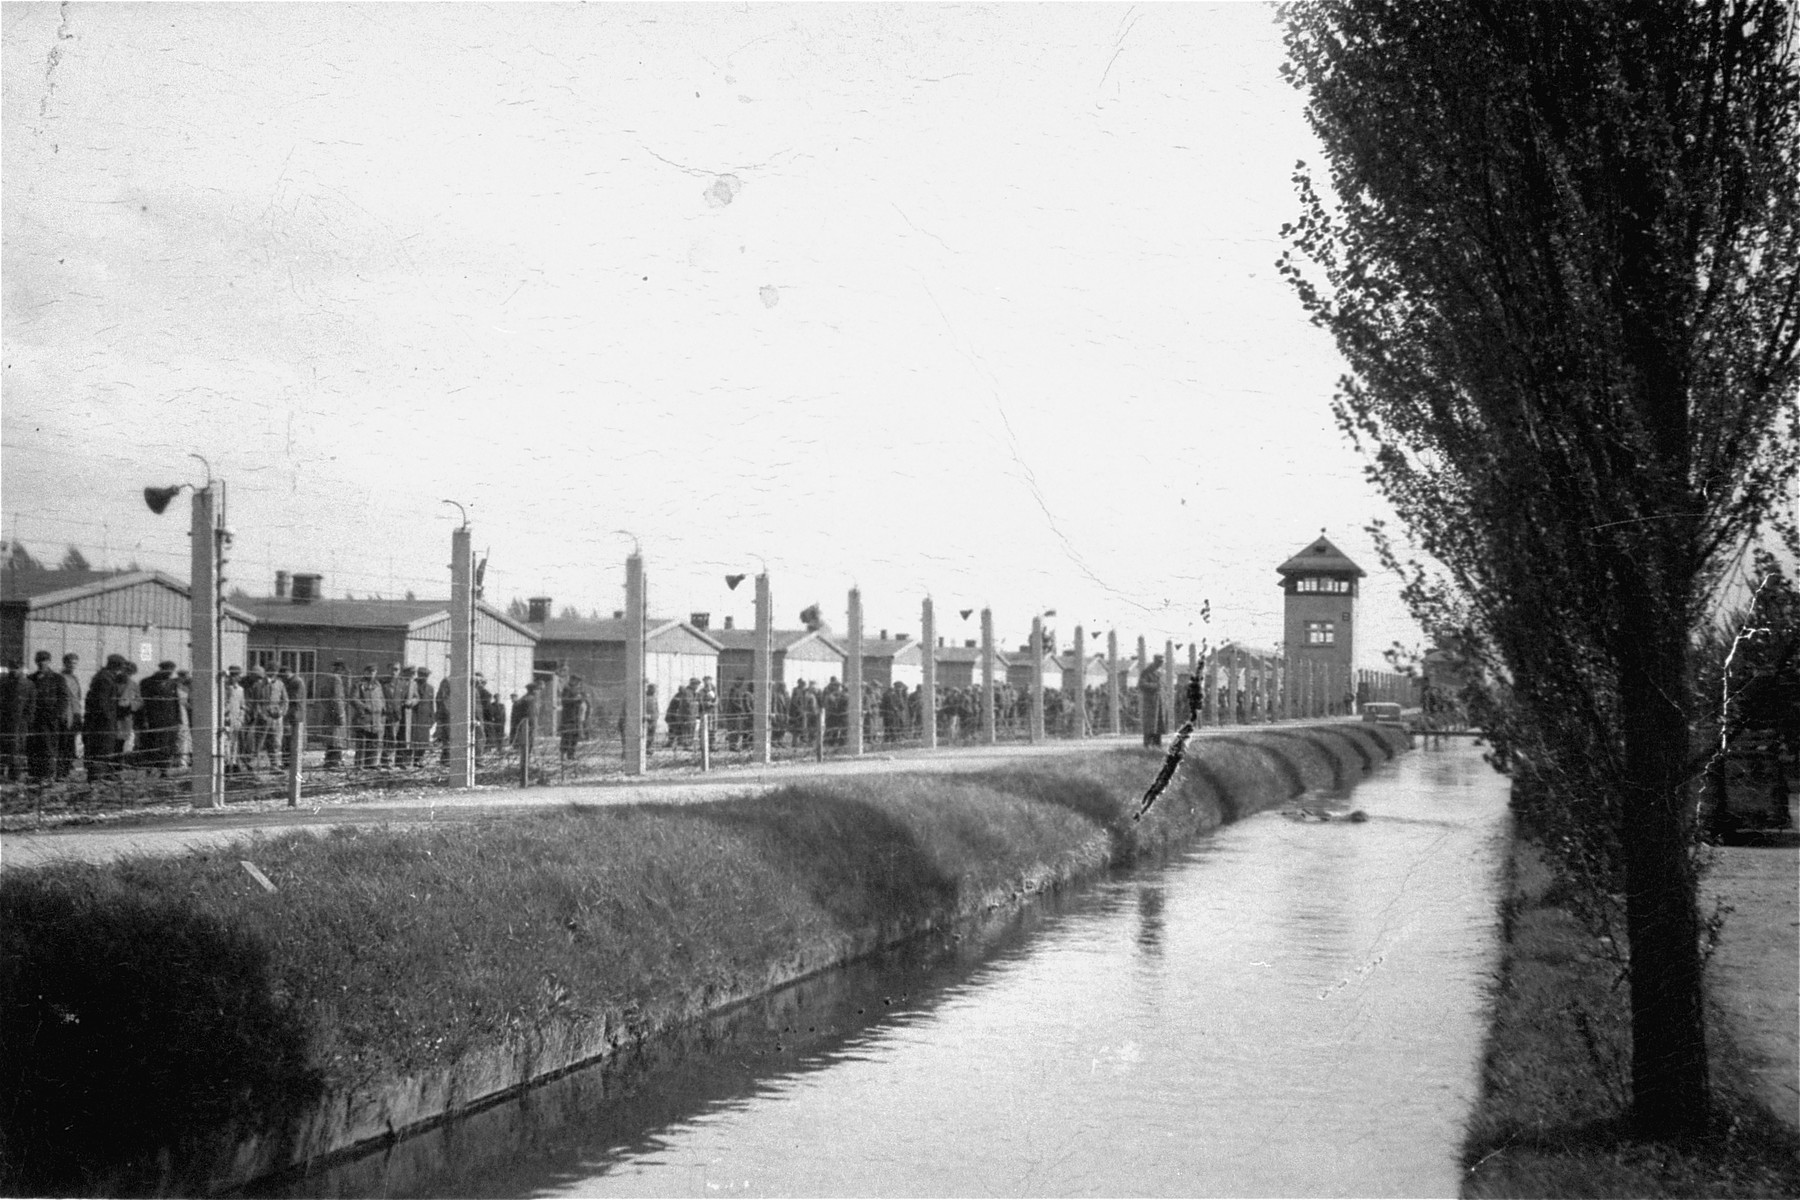 The barbed-wire fence and moat that surrounded the Dachau concentration camp.